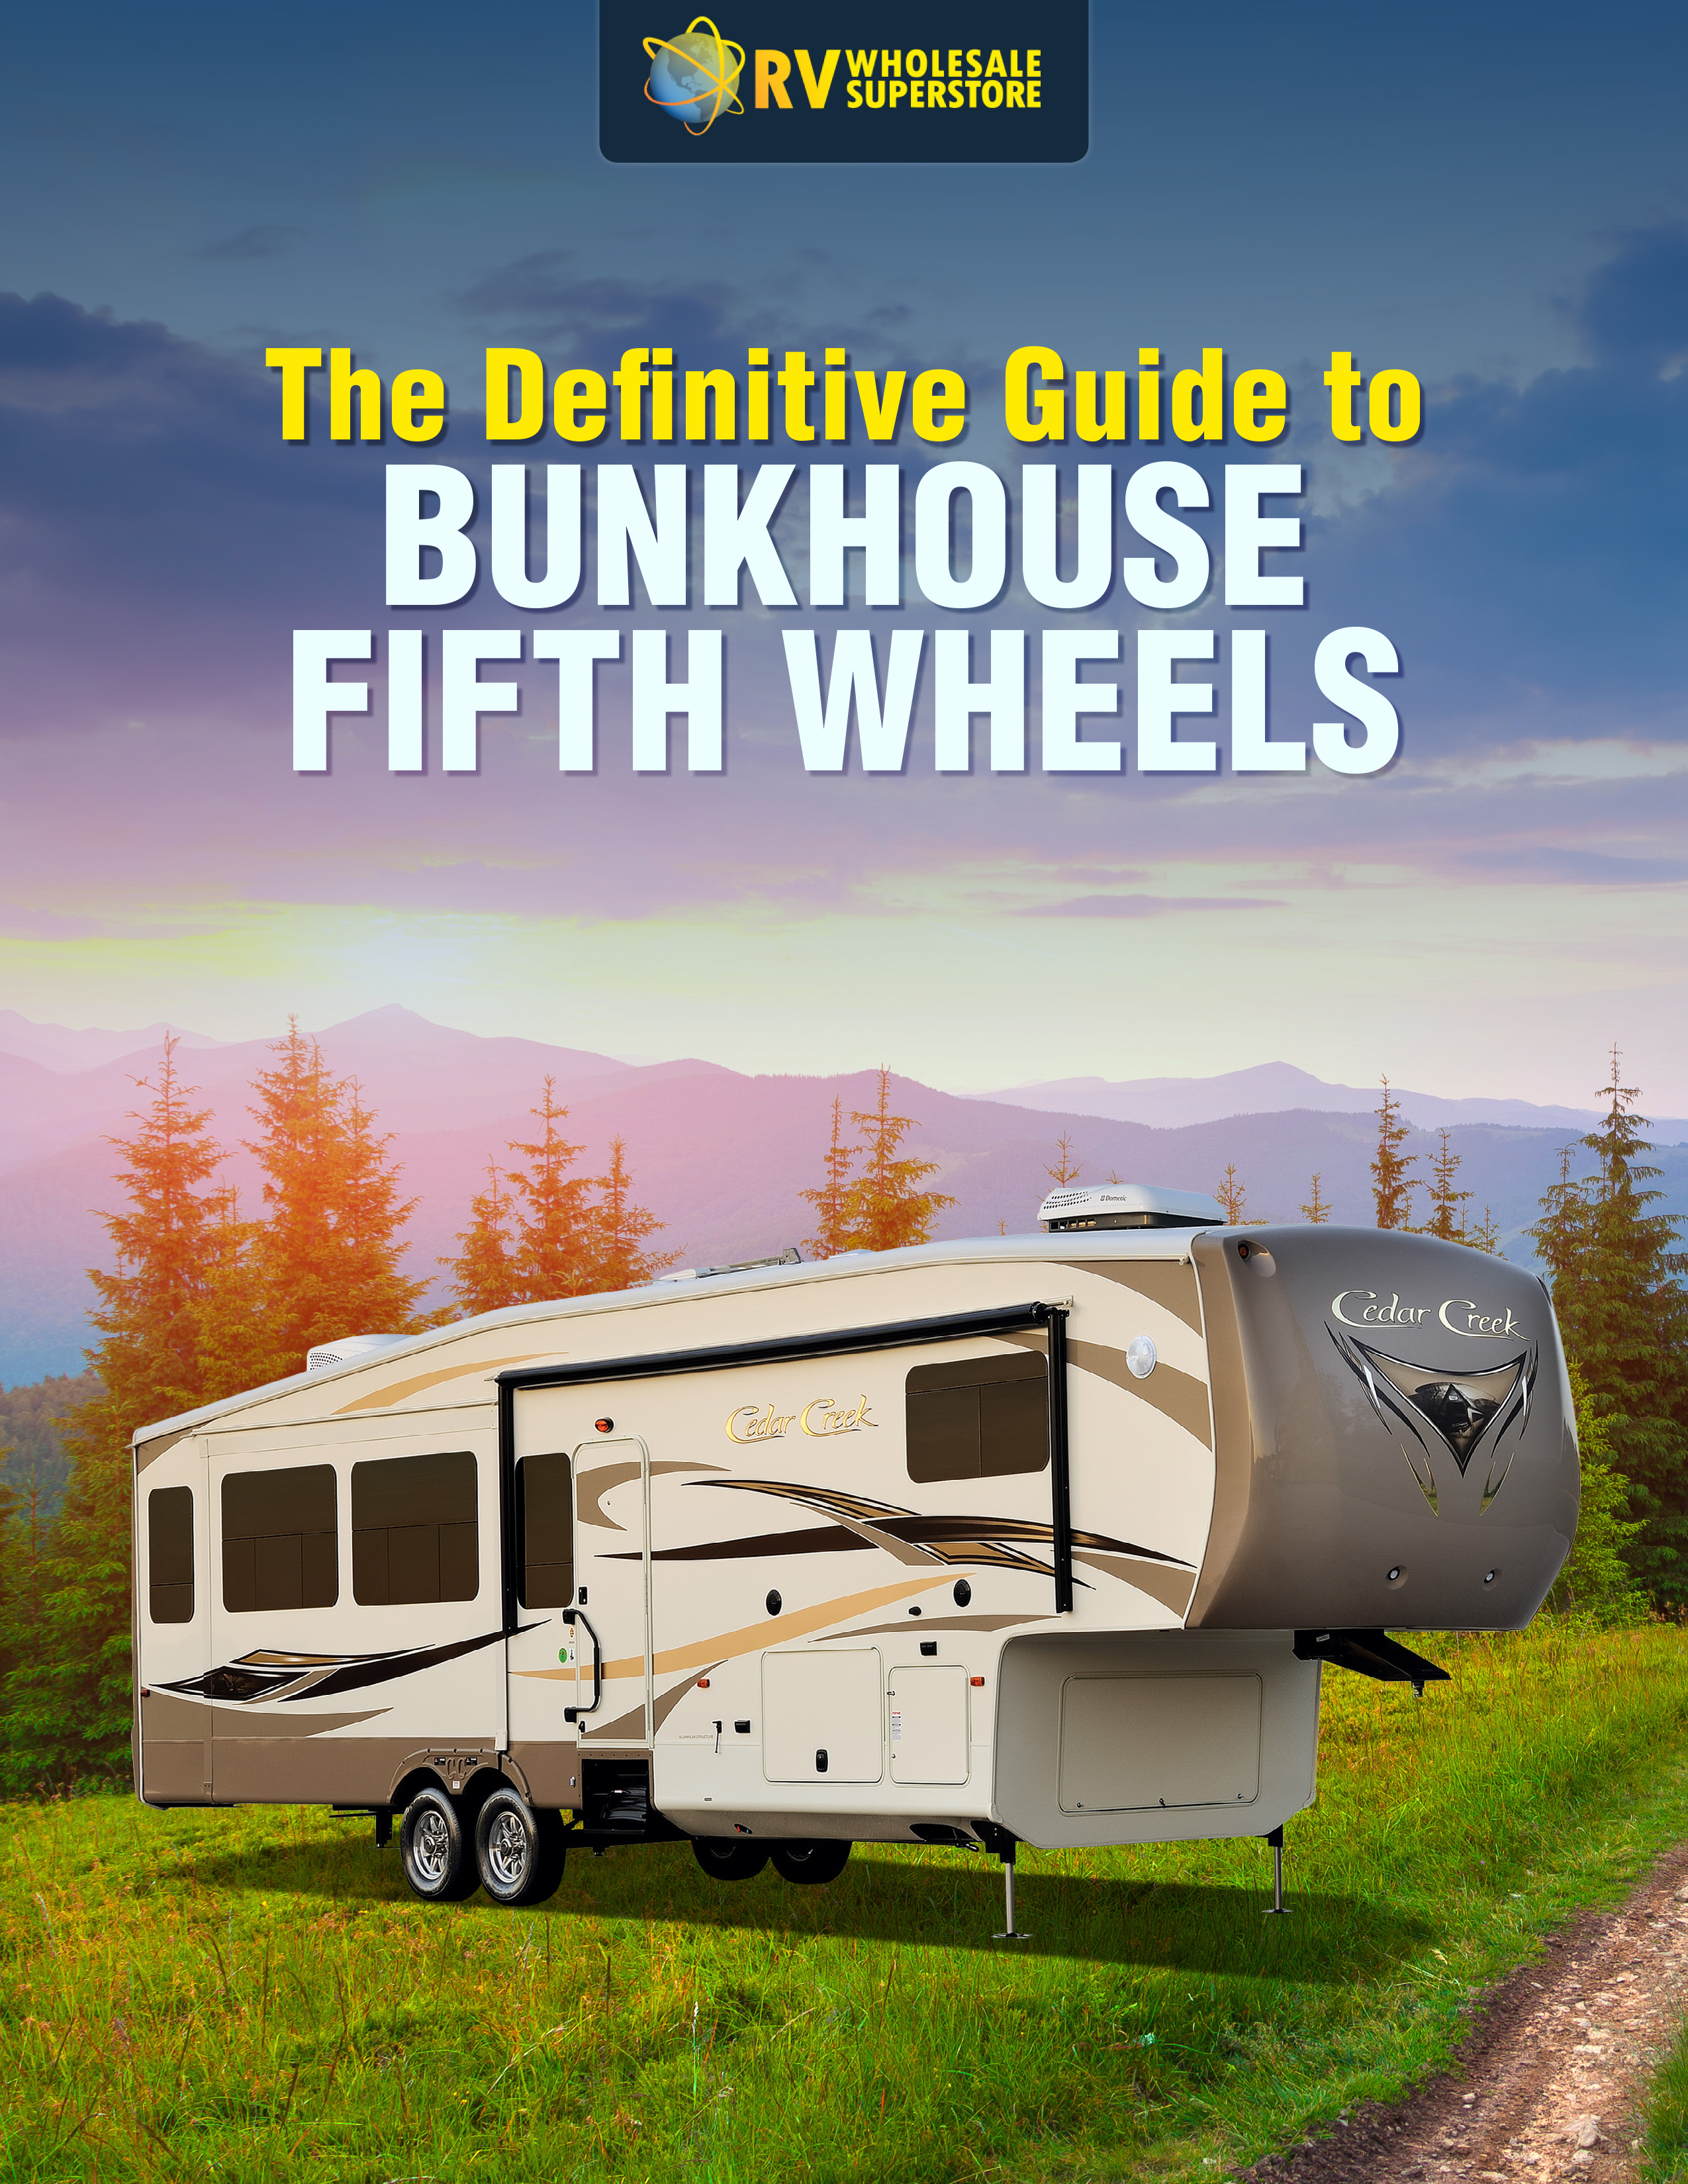 The-Definitive-Guide-to-Bunkhouse-Fifth-Wheel-1